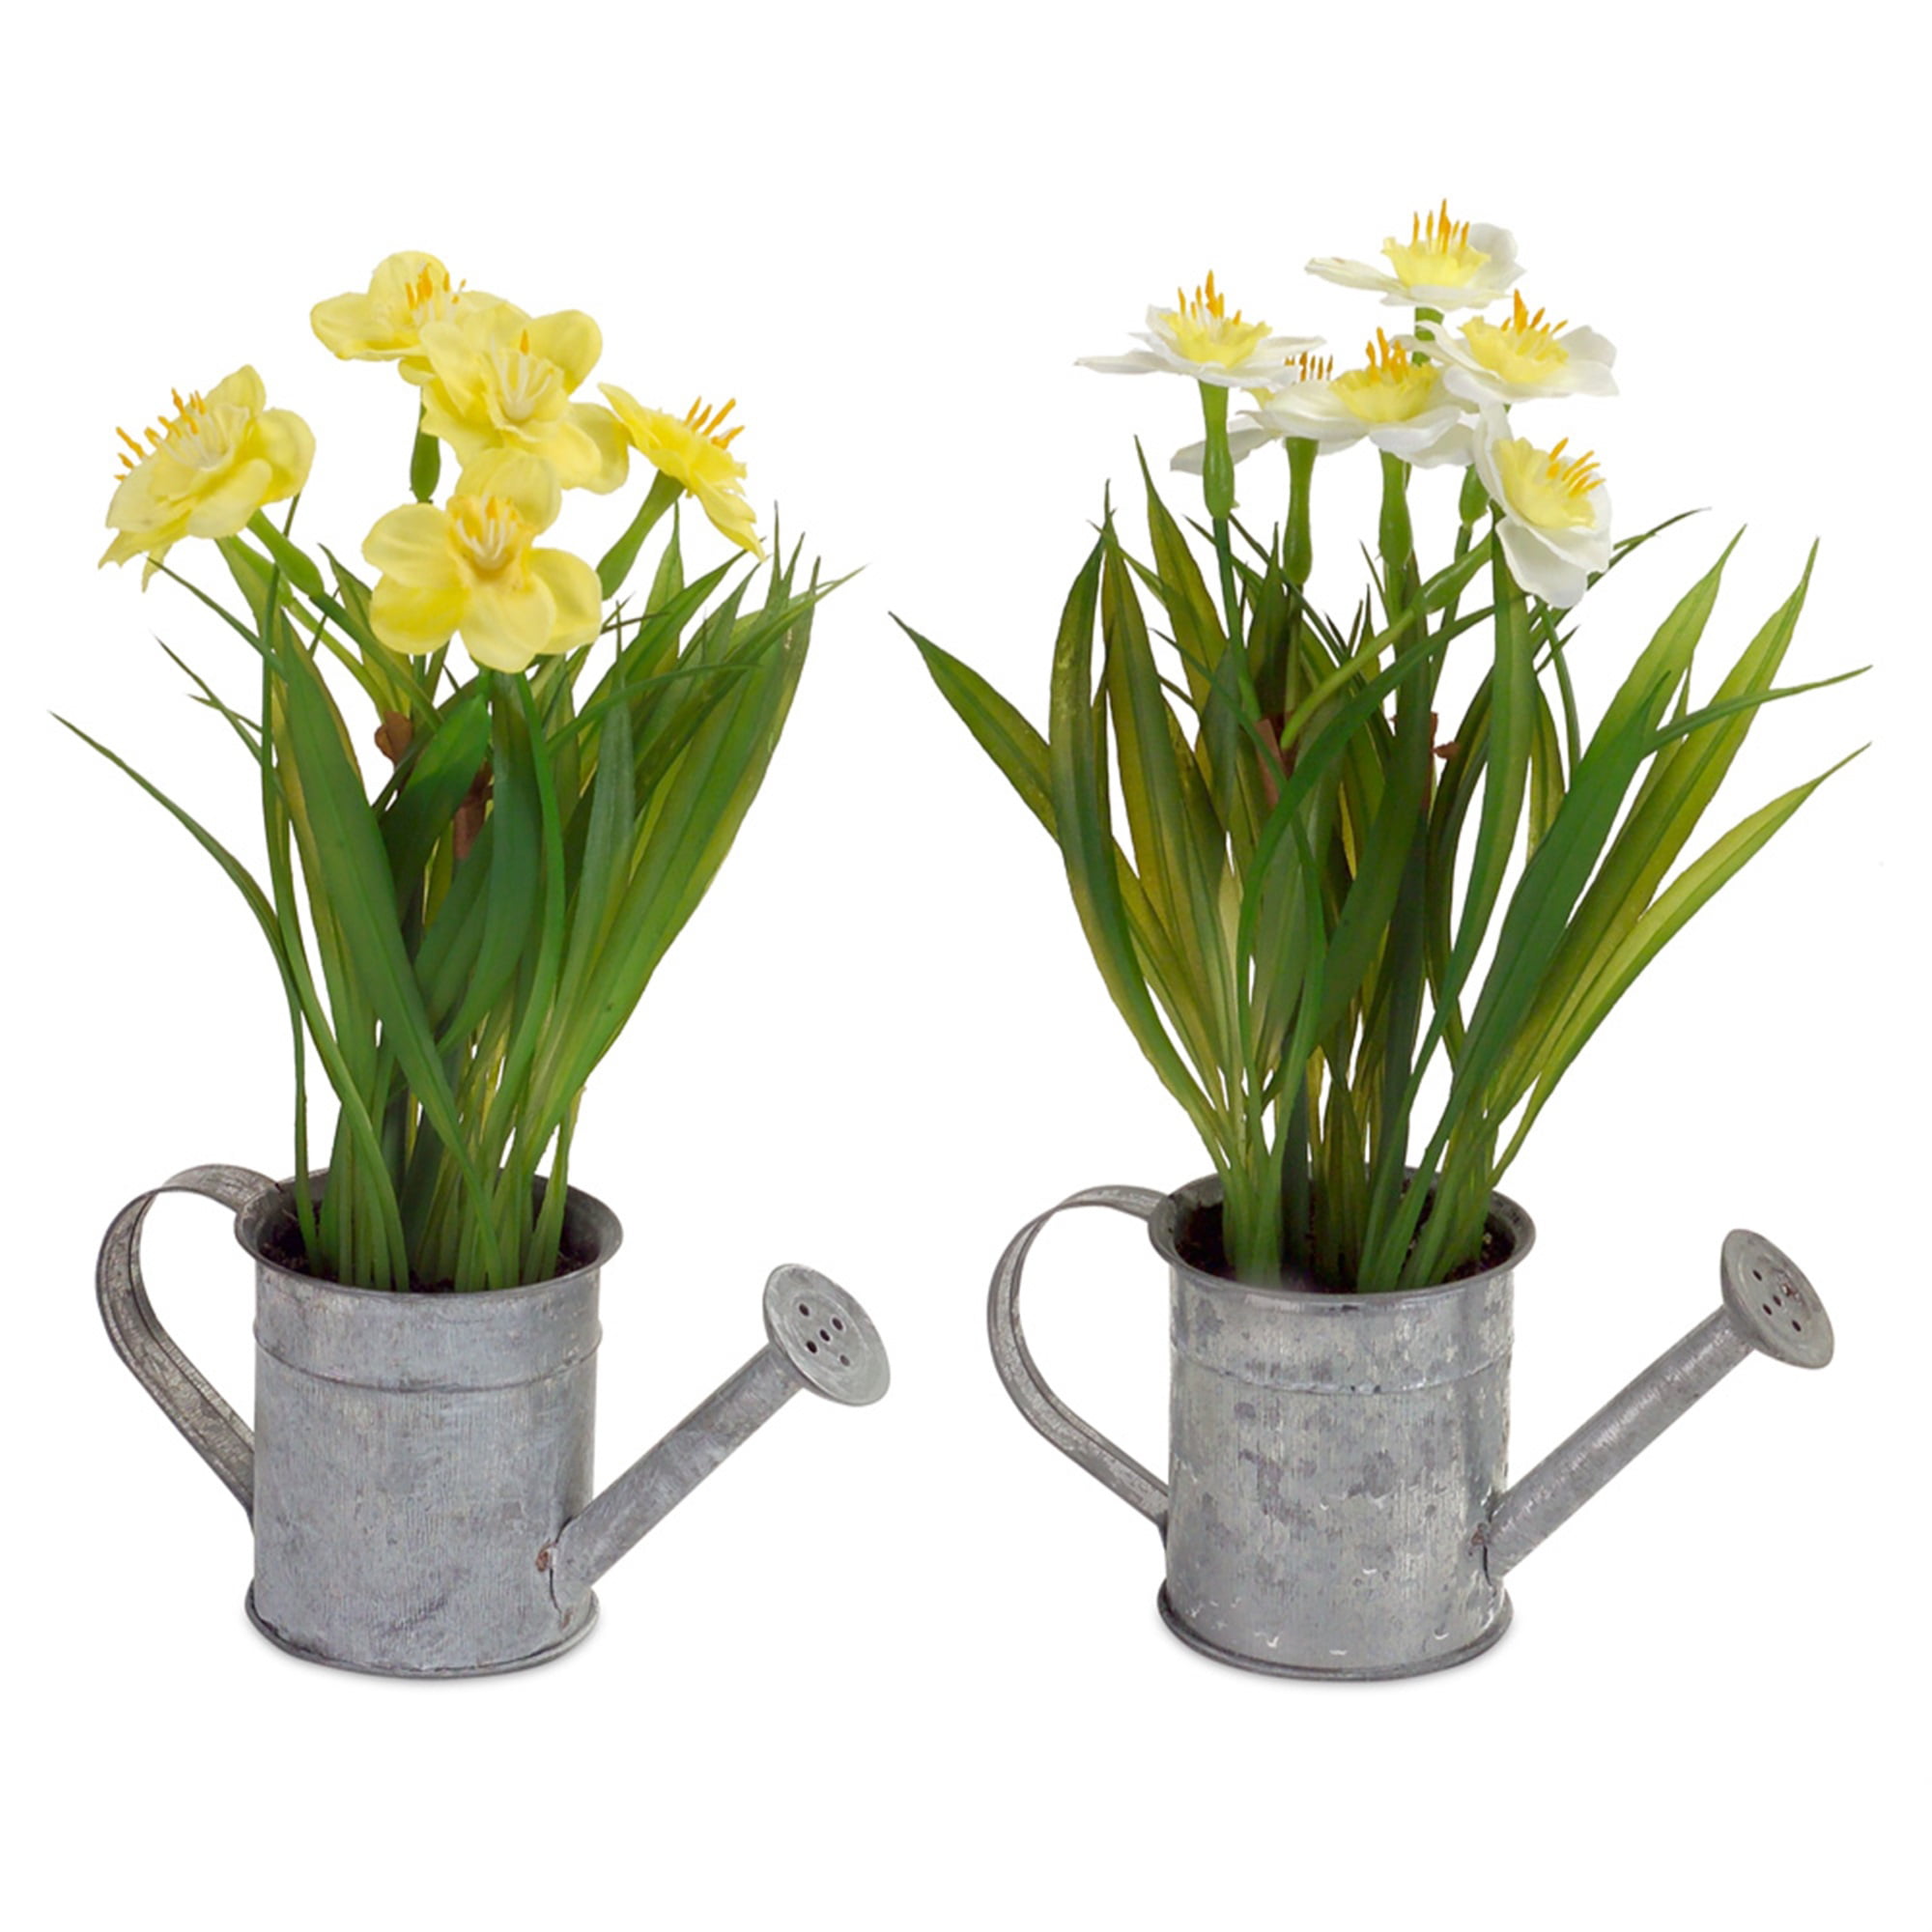 Daffodil in Watering Can (Set of 12) 9"H Metal/Plastic